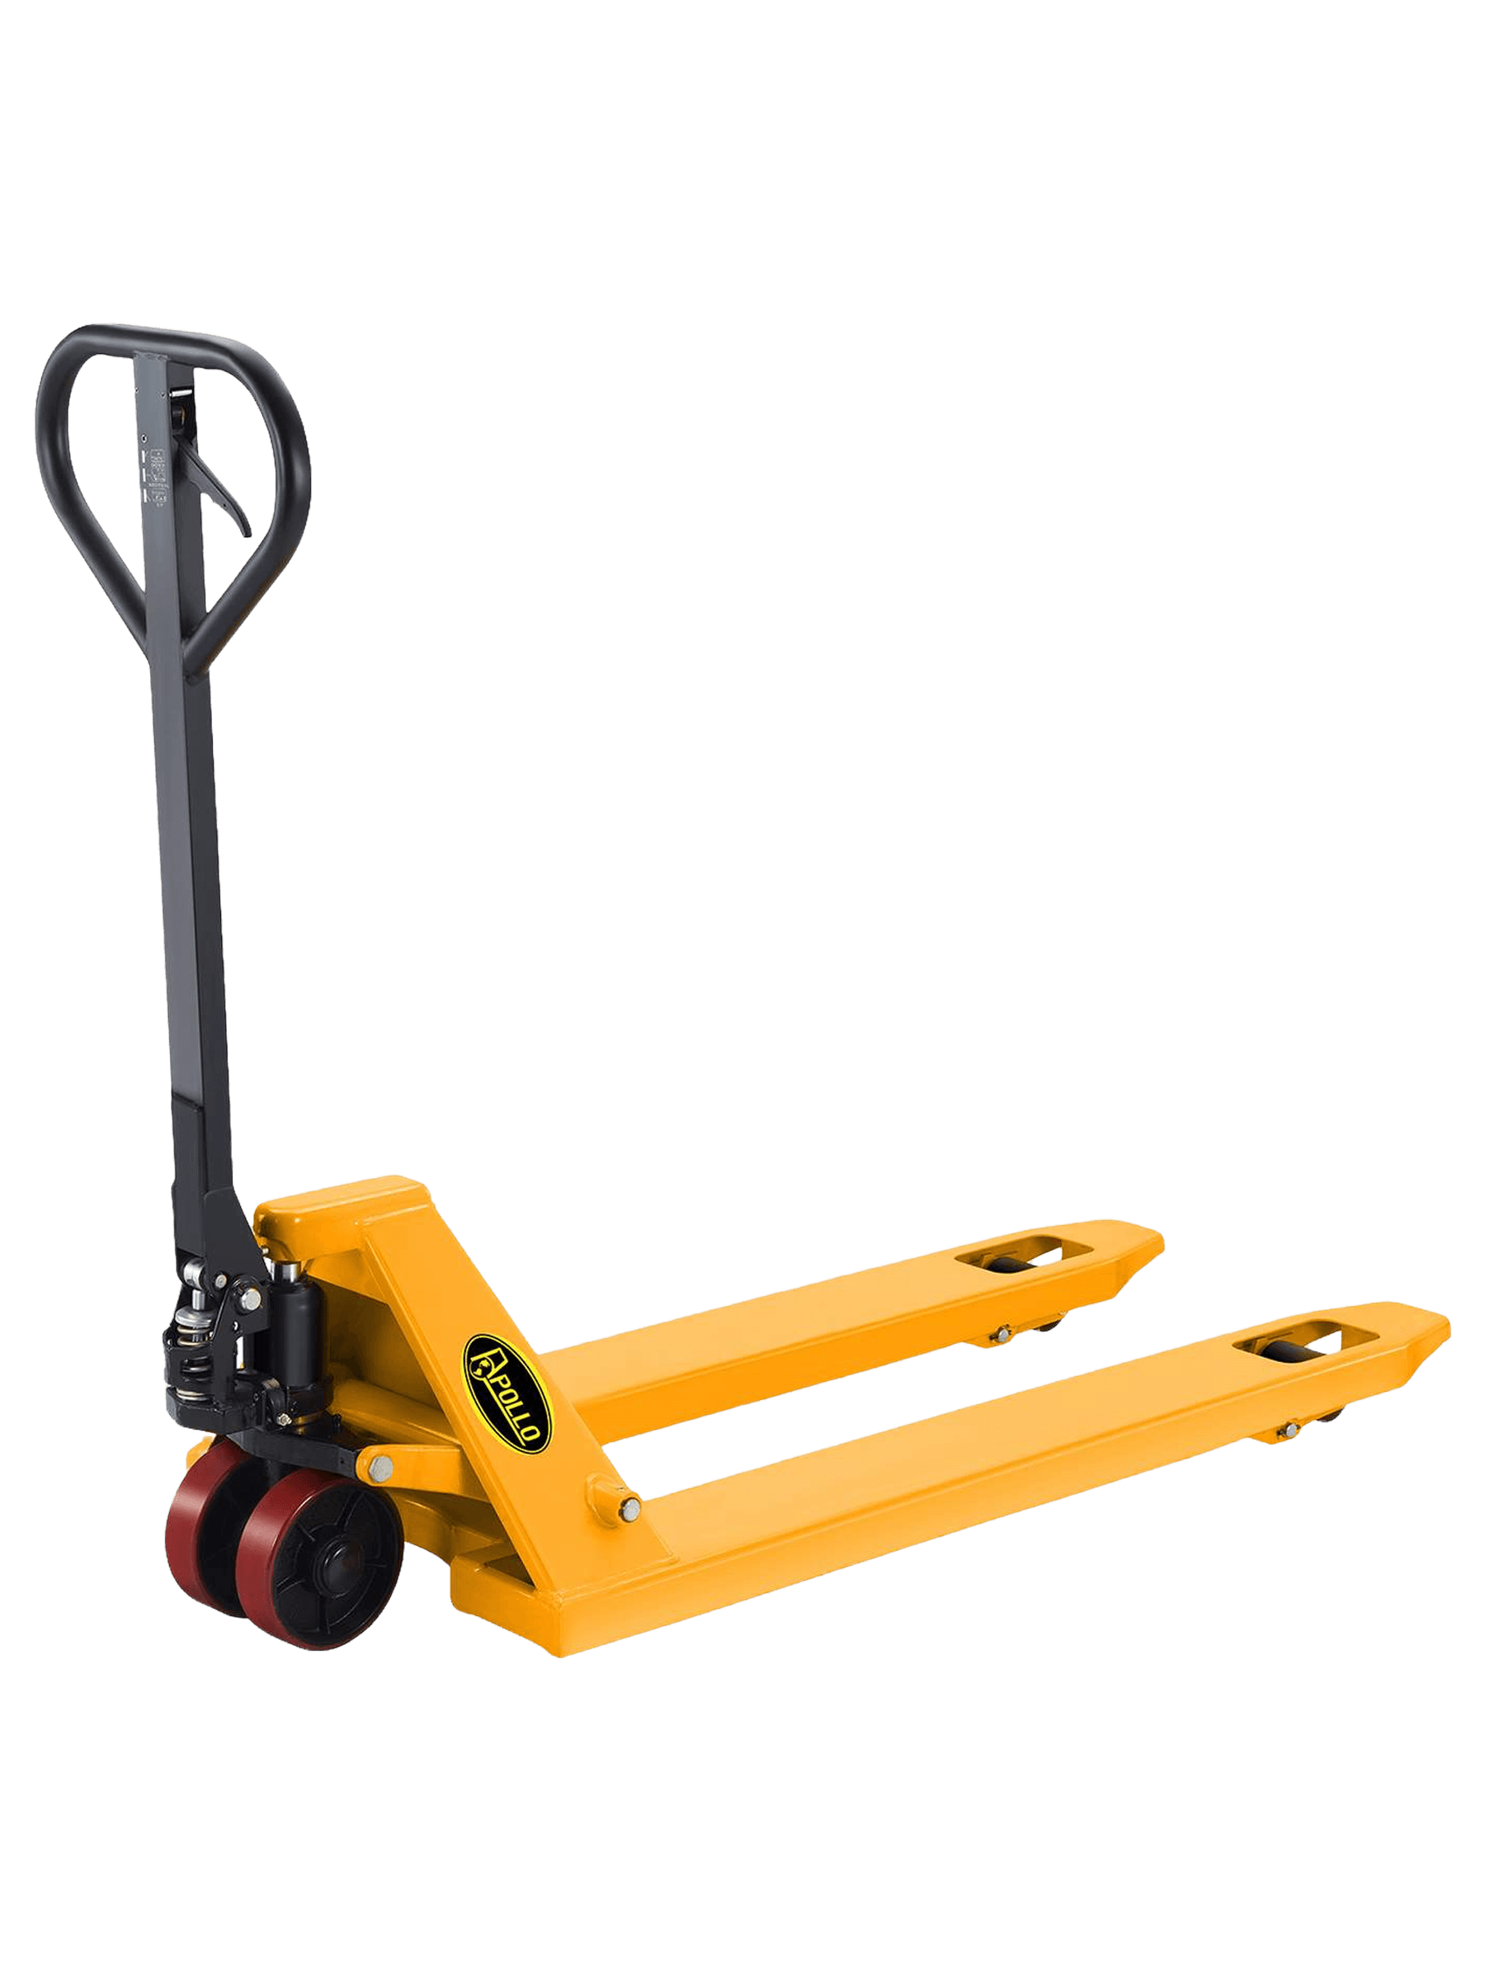 Picture of Pallet Jack - Narrow Fork 48"x21"